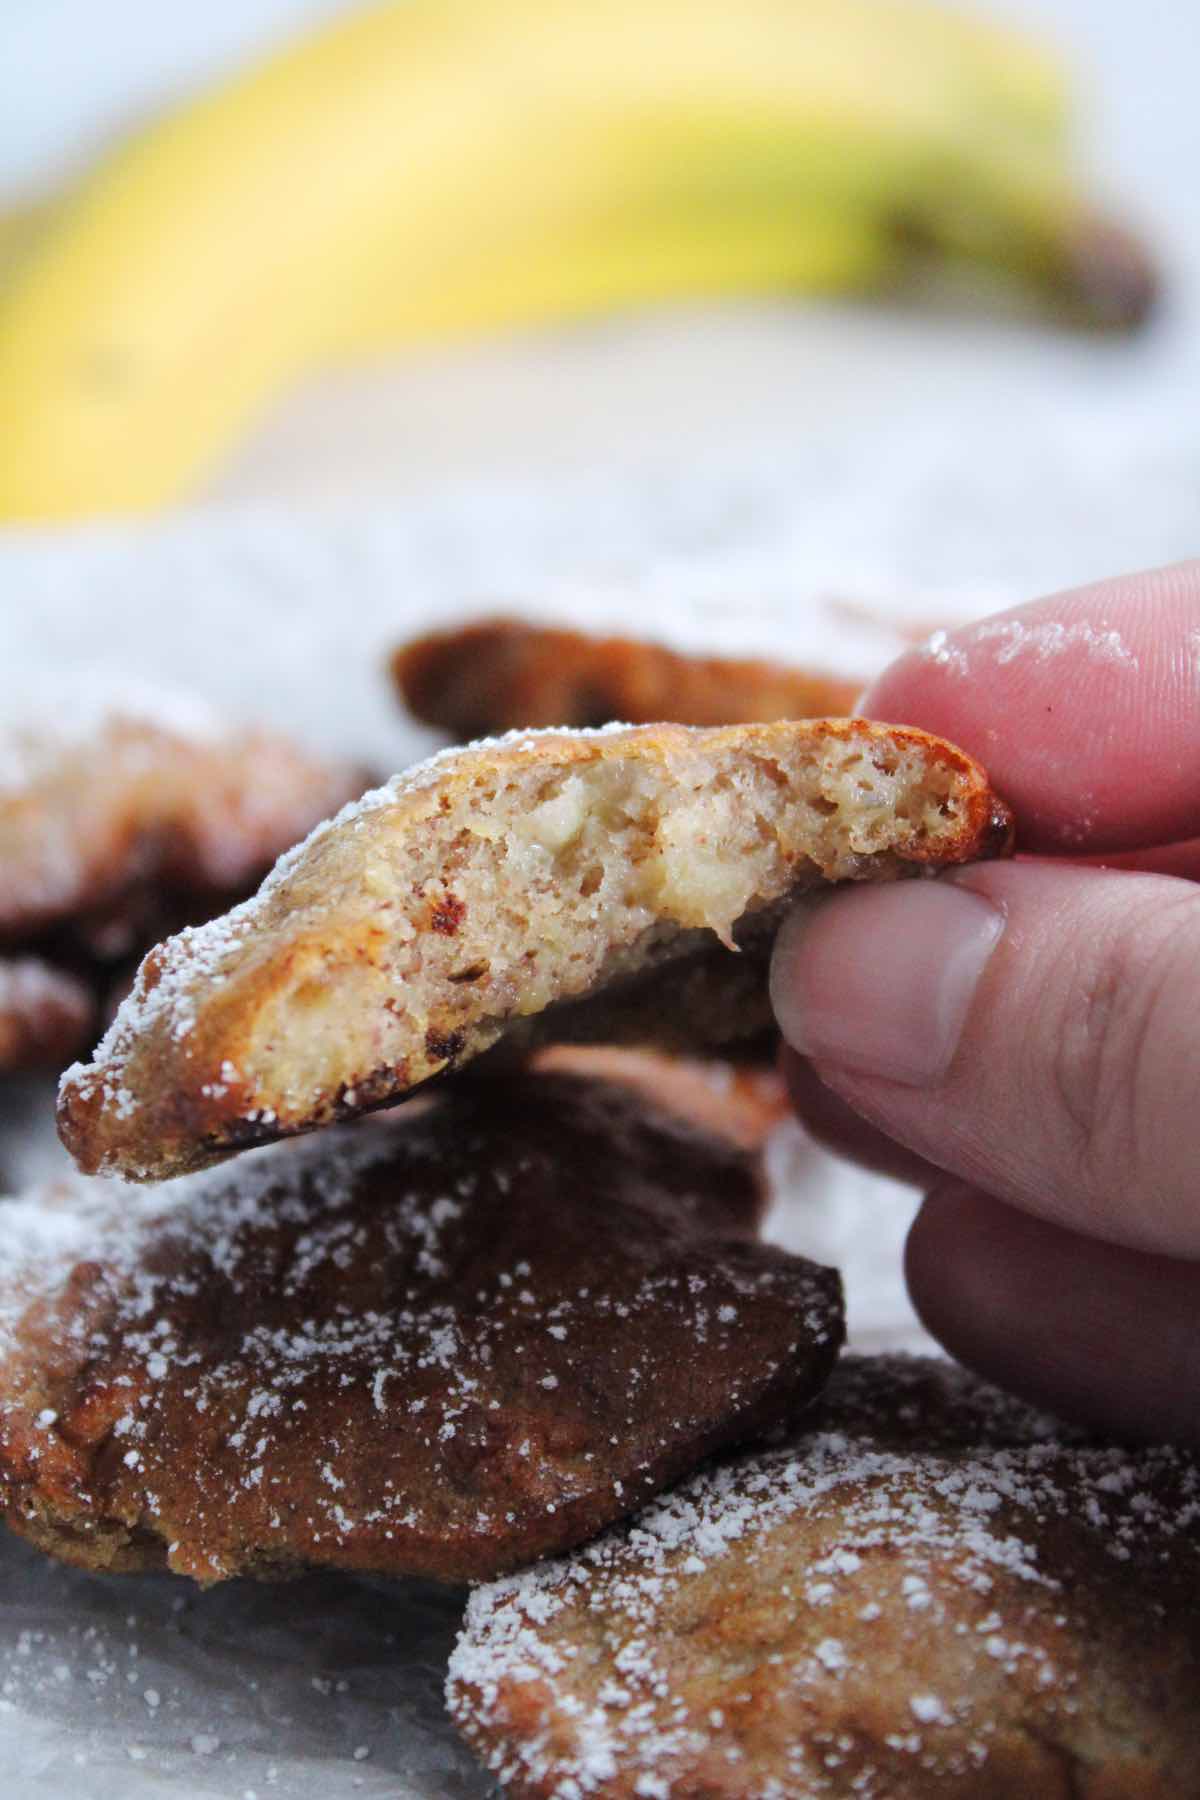 Serve these fritters topped with powdered sugar, drizzled with honey and so much more.